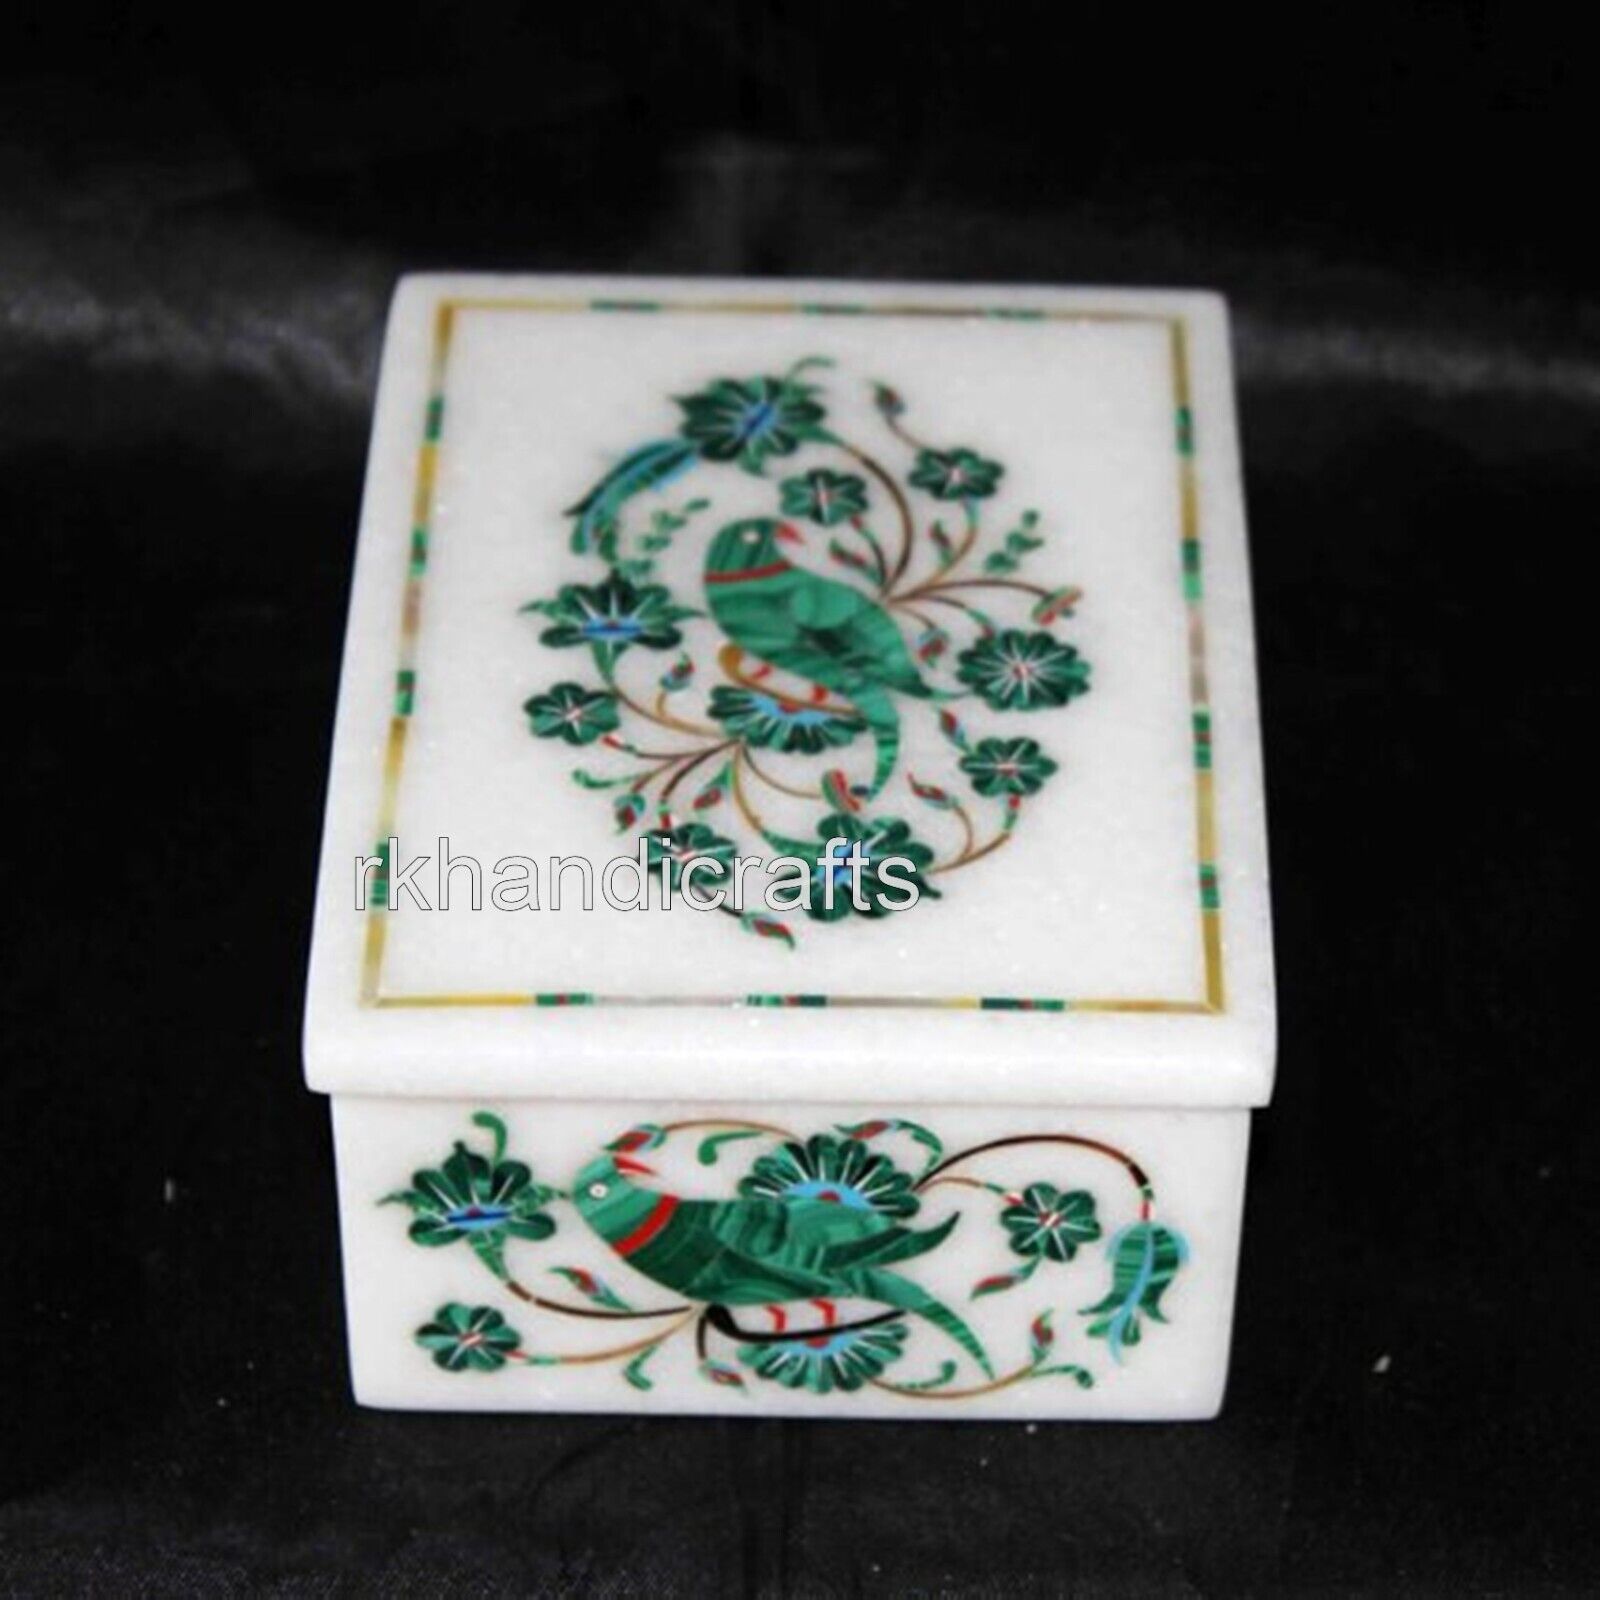 5 x 3.5 Inches Malachite Stone Inlay Work from Vintage Art White Marble Tie Box